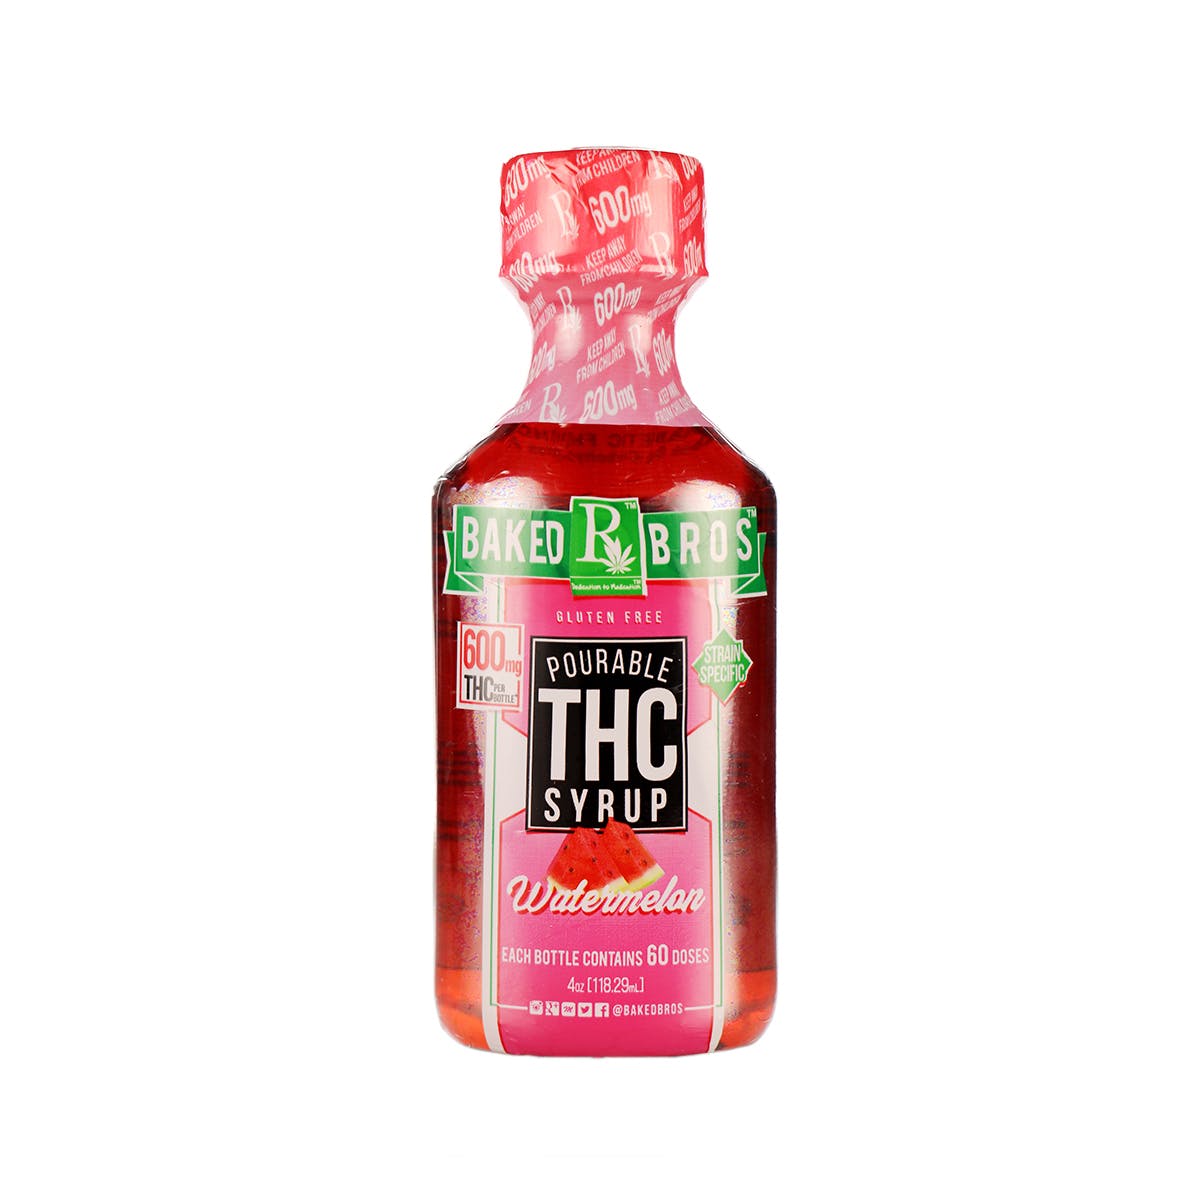 THC Syrup Watermelon 600mg